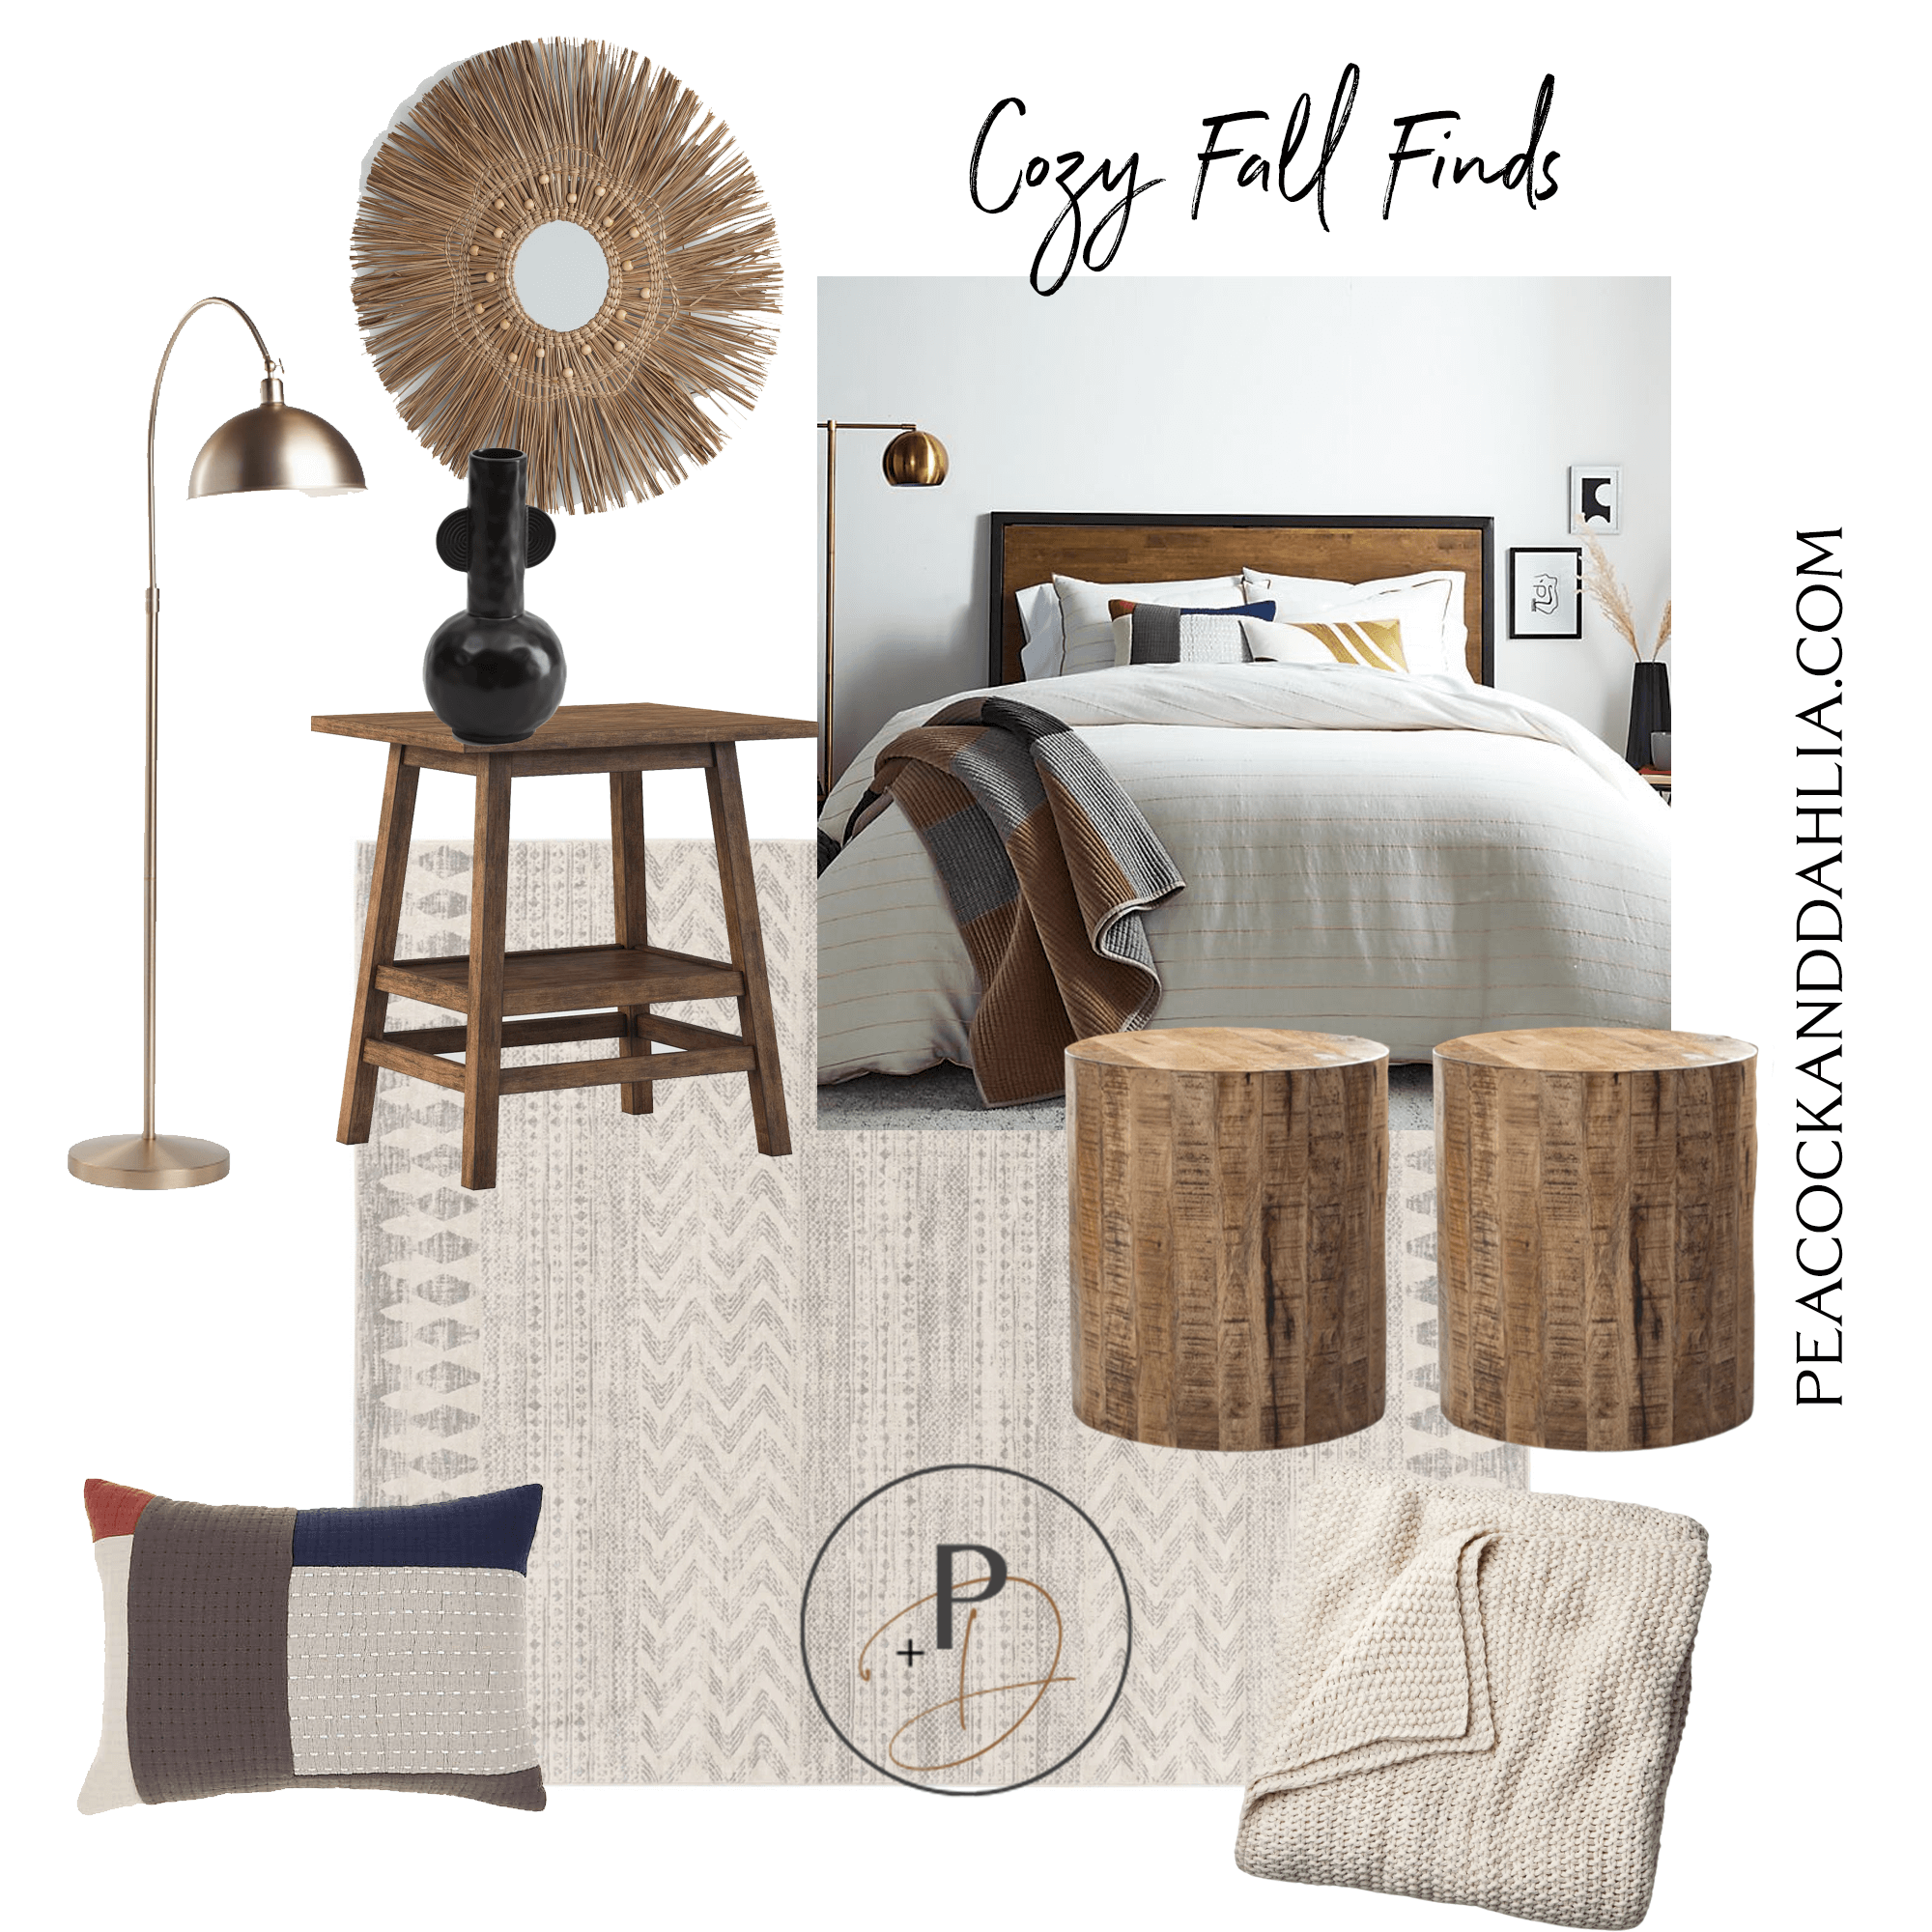 Shop The Look | Cozy Fall Finds